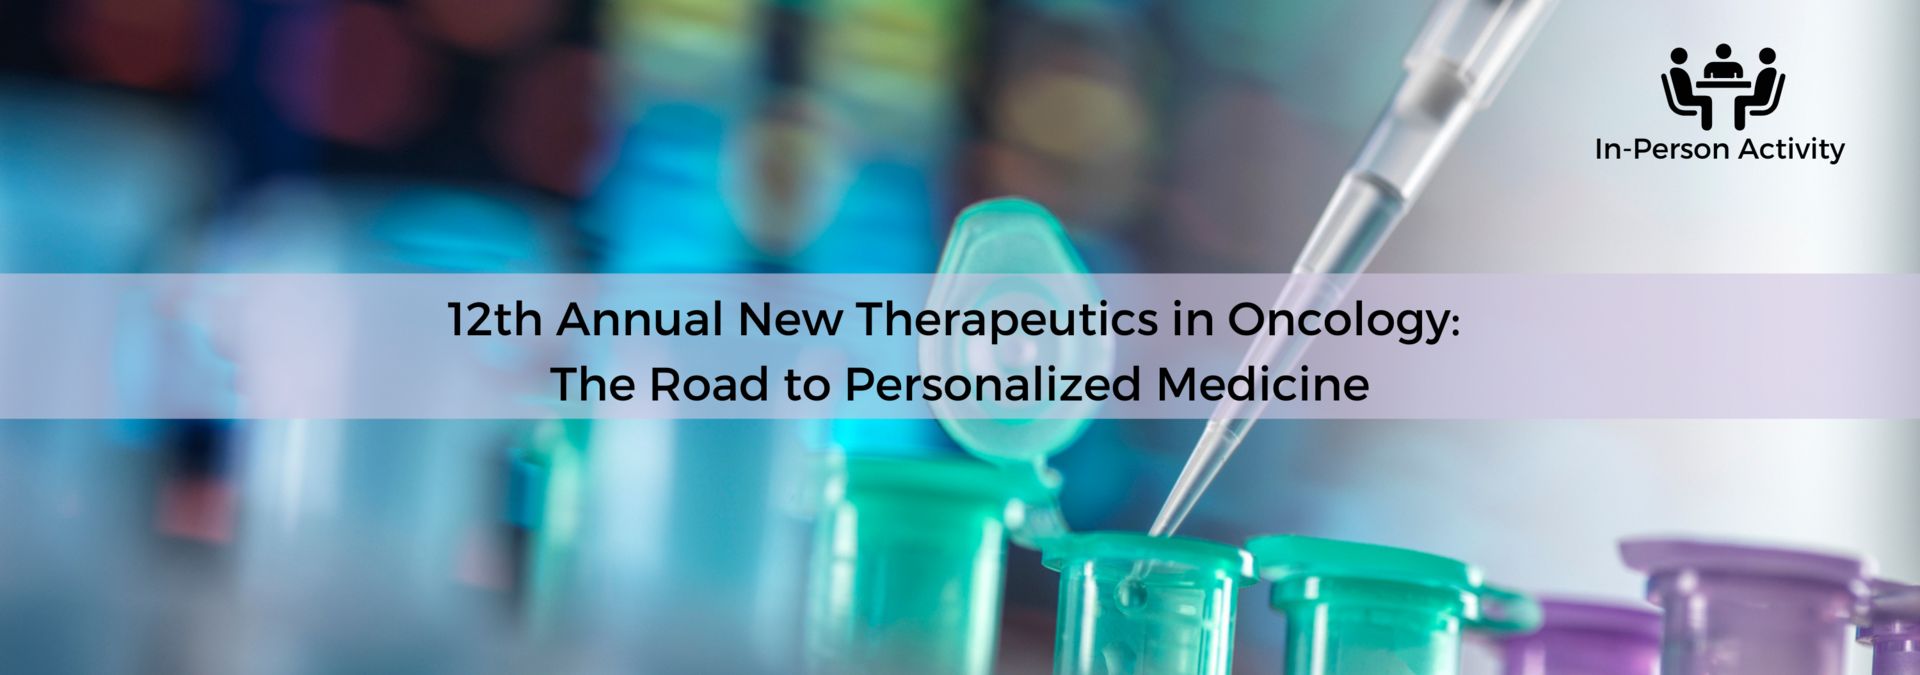 12th Annual New Therapeutics in Oncology: The Road to Personalized Medicine, Los Angeles, California, United States